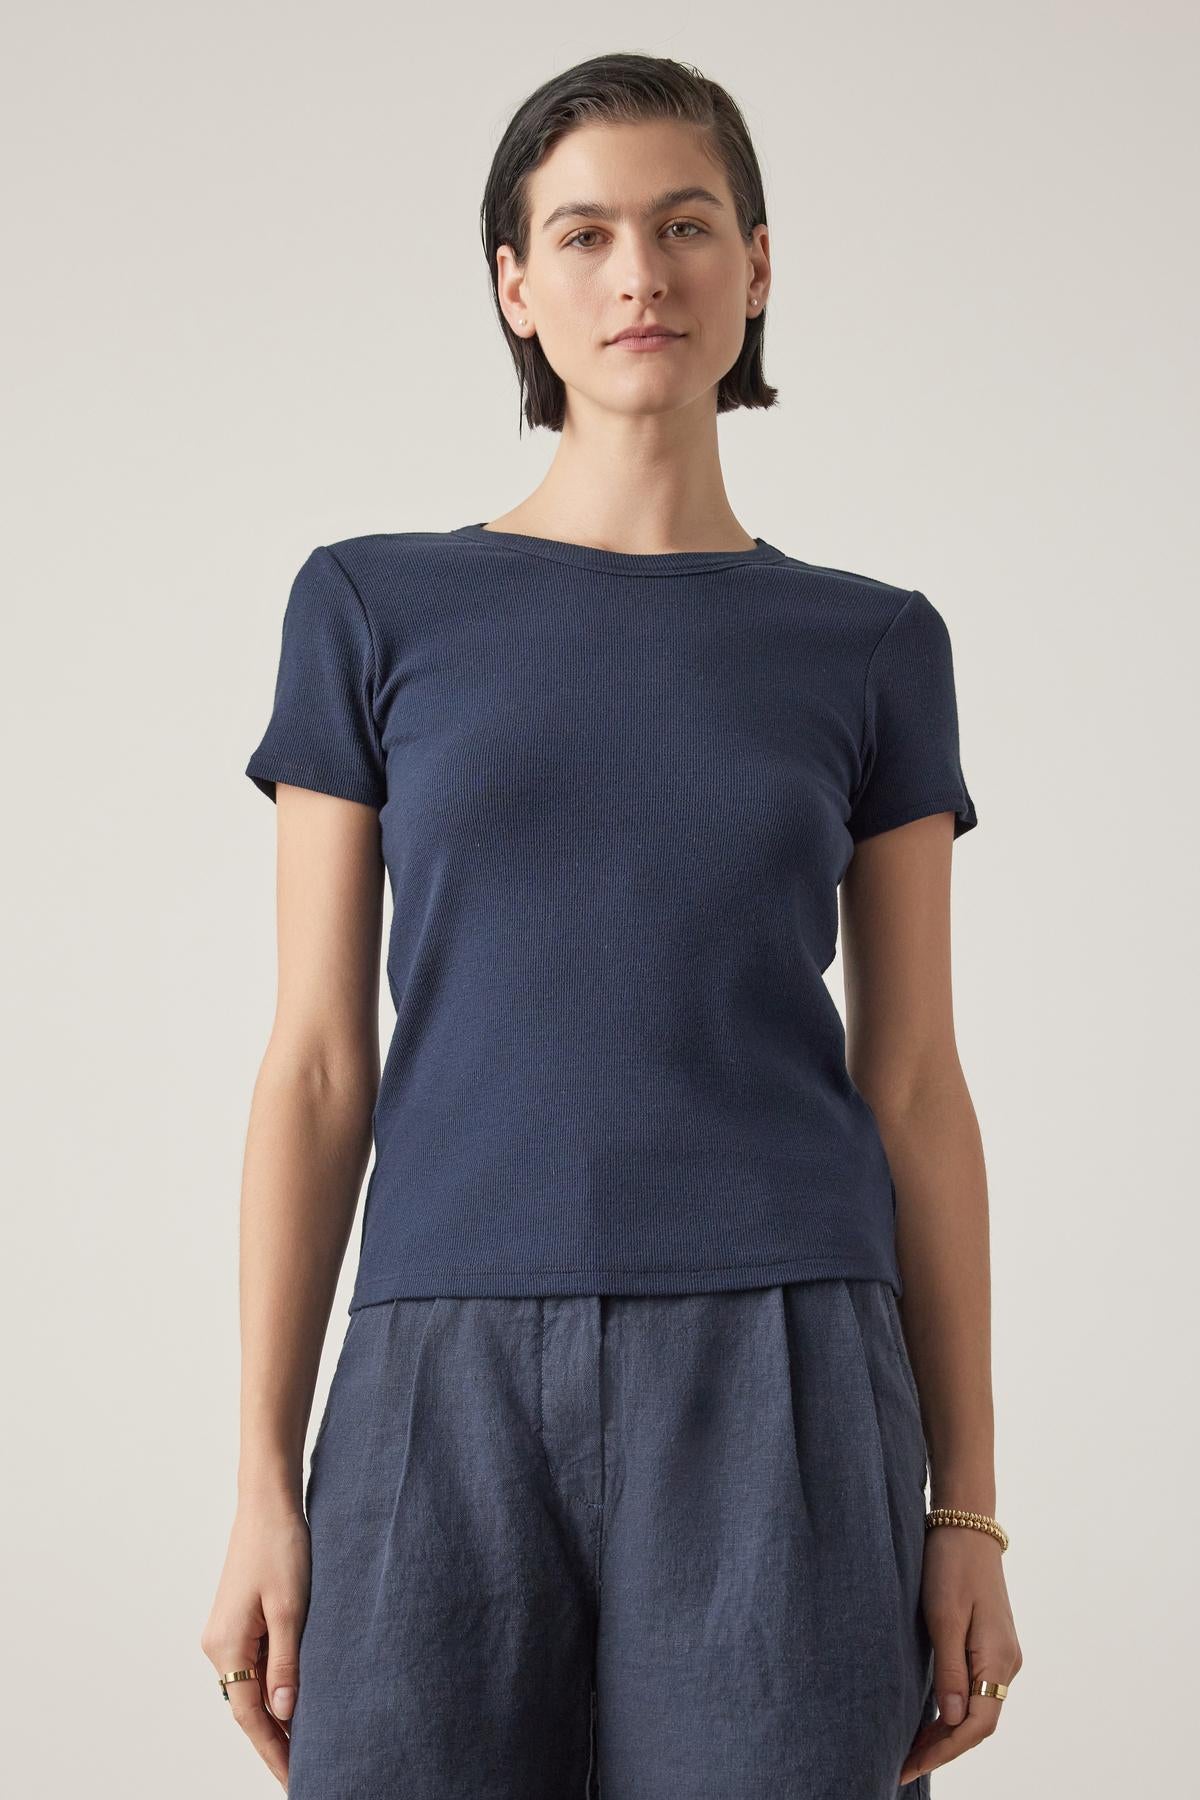 A woman with short hair, wearing a Velvet by Jenny Graham dark blue Bedford Tee with a crew neckline and gray pants, stands against a light background.-36753616863425